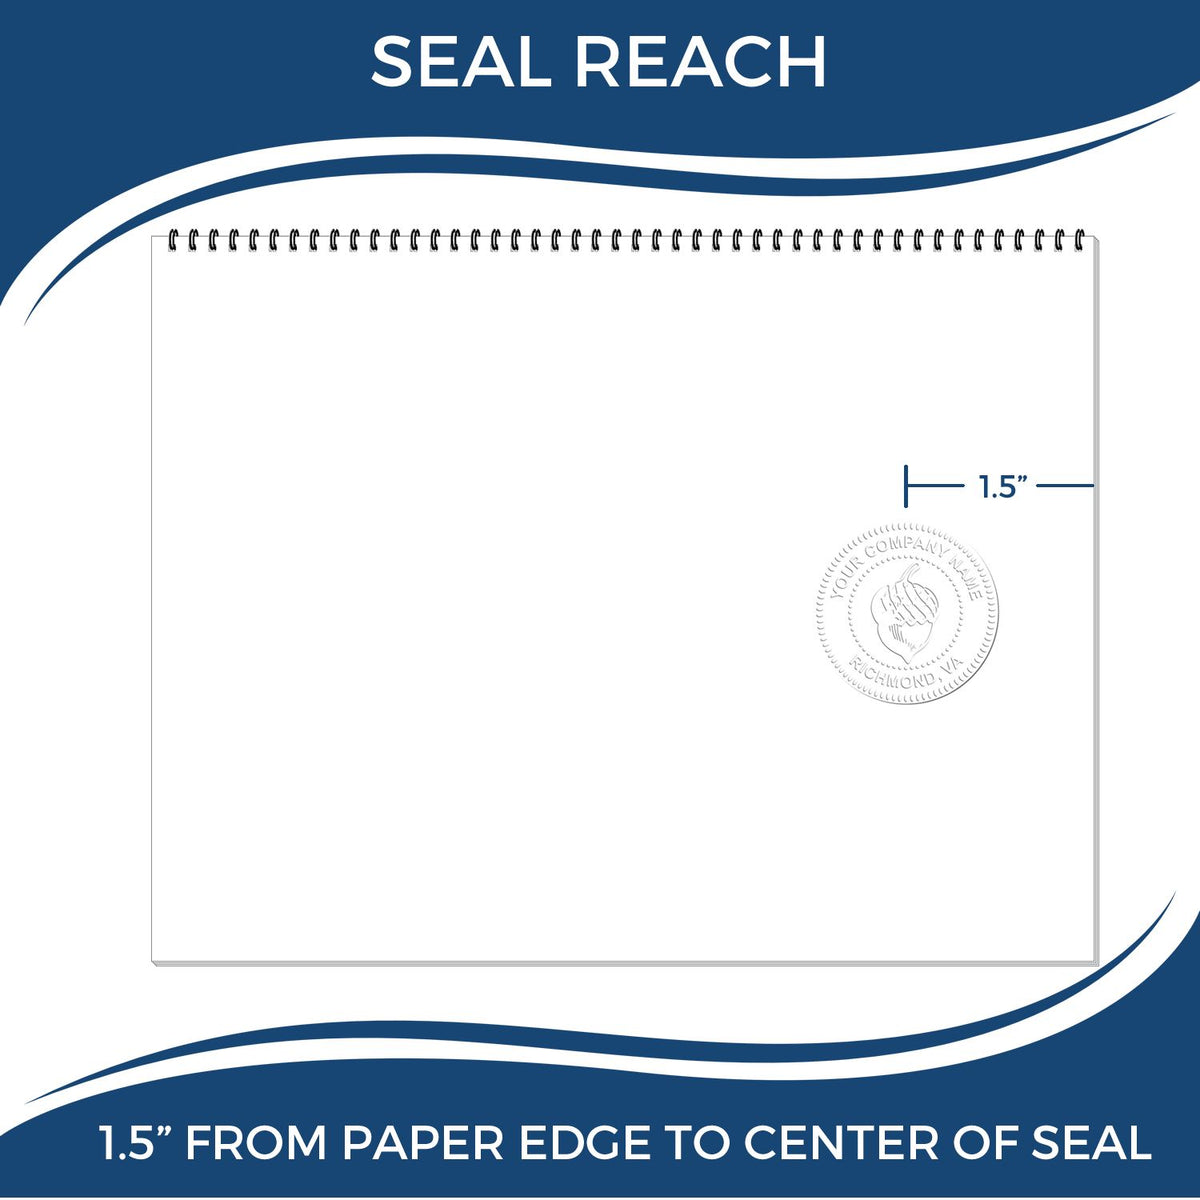 An infographic showing the seal reach which is represented by a ruler and a miniature seal image of the Hybrid Colorado Land Surveyor Seal